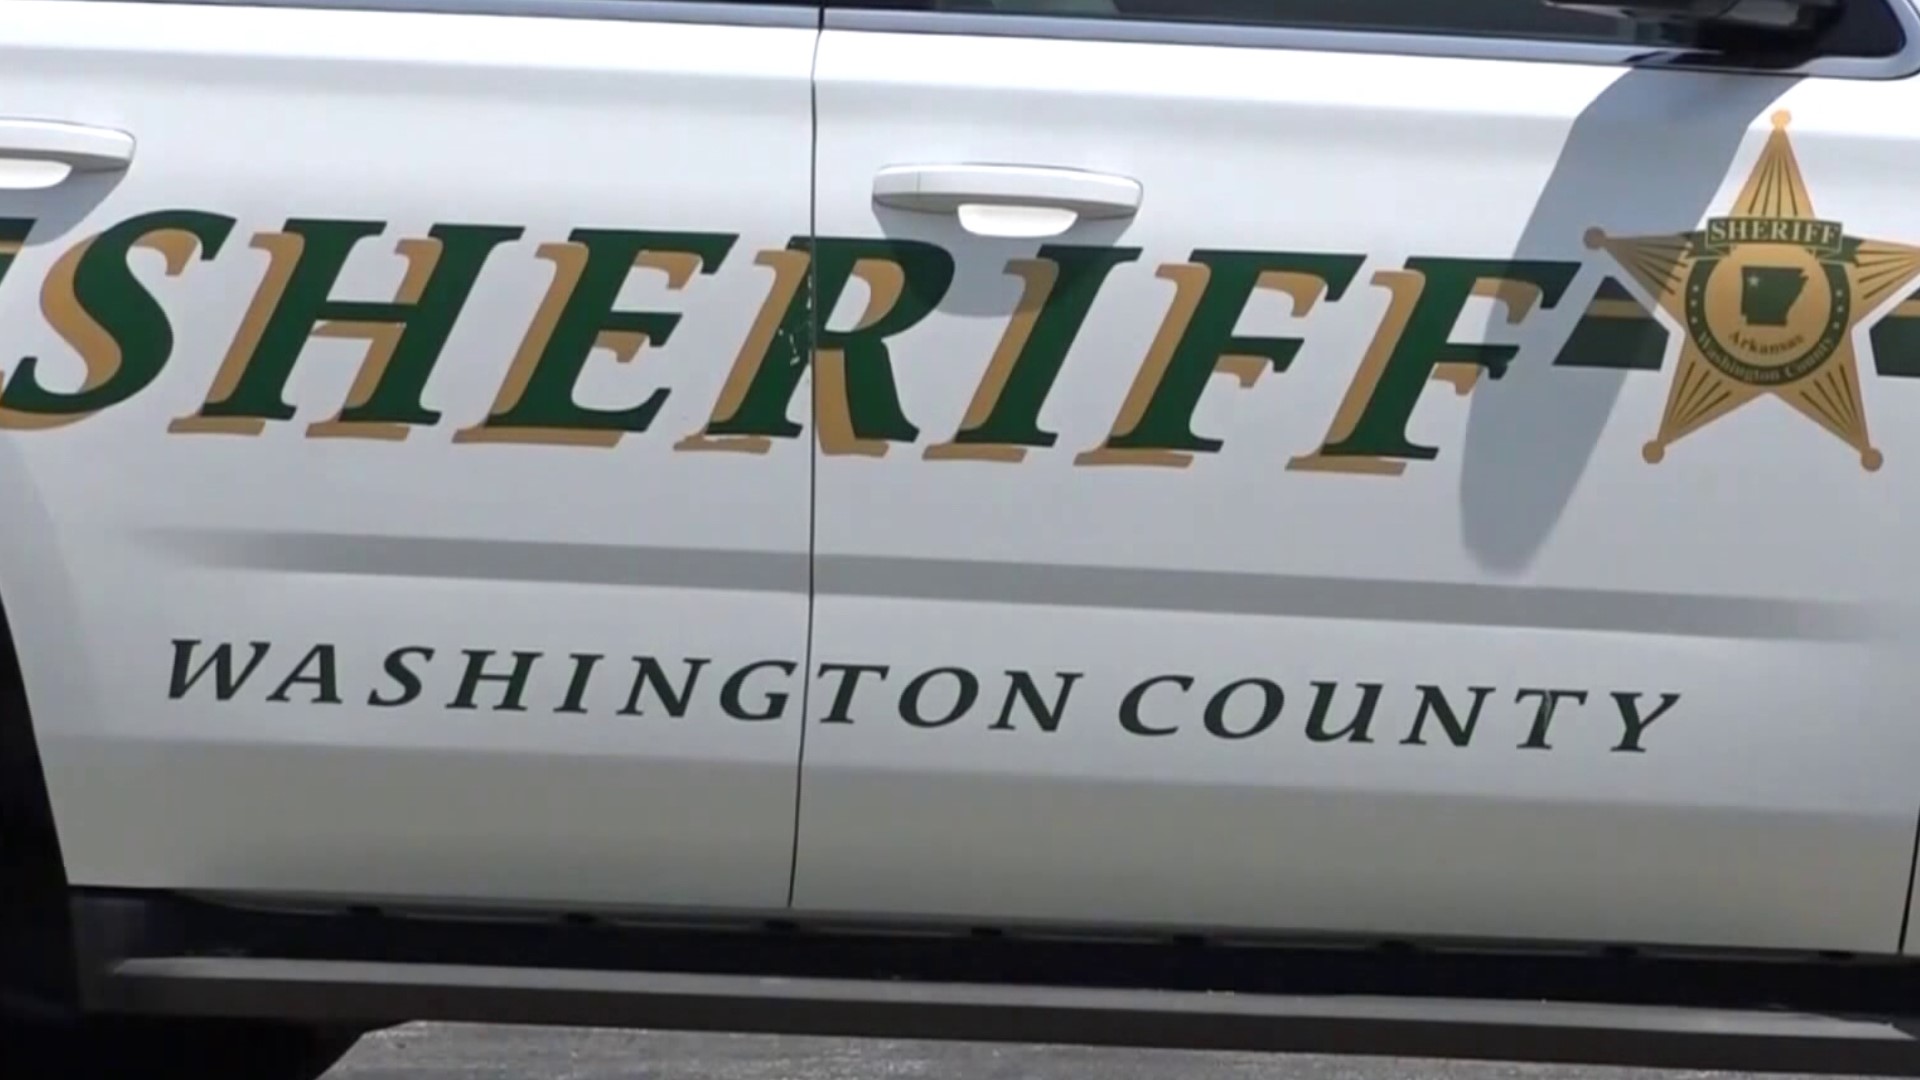 THE WASHINGTON COUNTY SHERIFF'S OFFICE IS SEARCHING FOR SUSPECTS AFTER A SHOOTING THAT LEFT ONE PERSON SERIOUSLY INJURED...